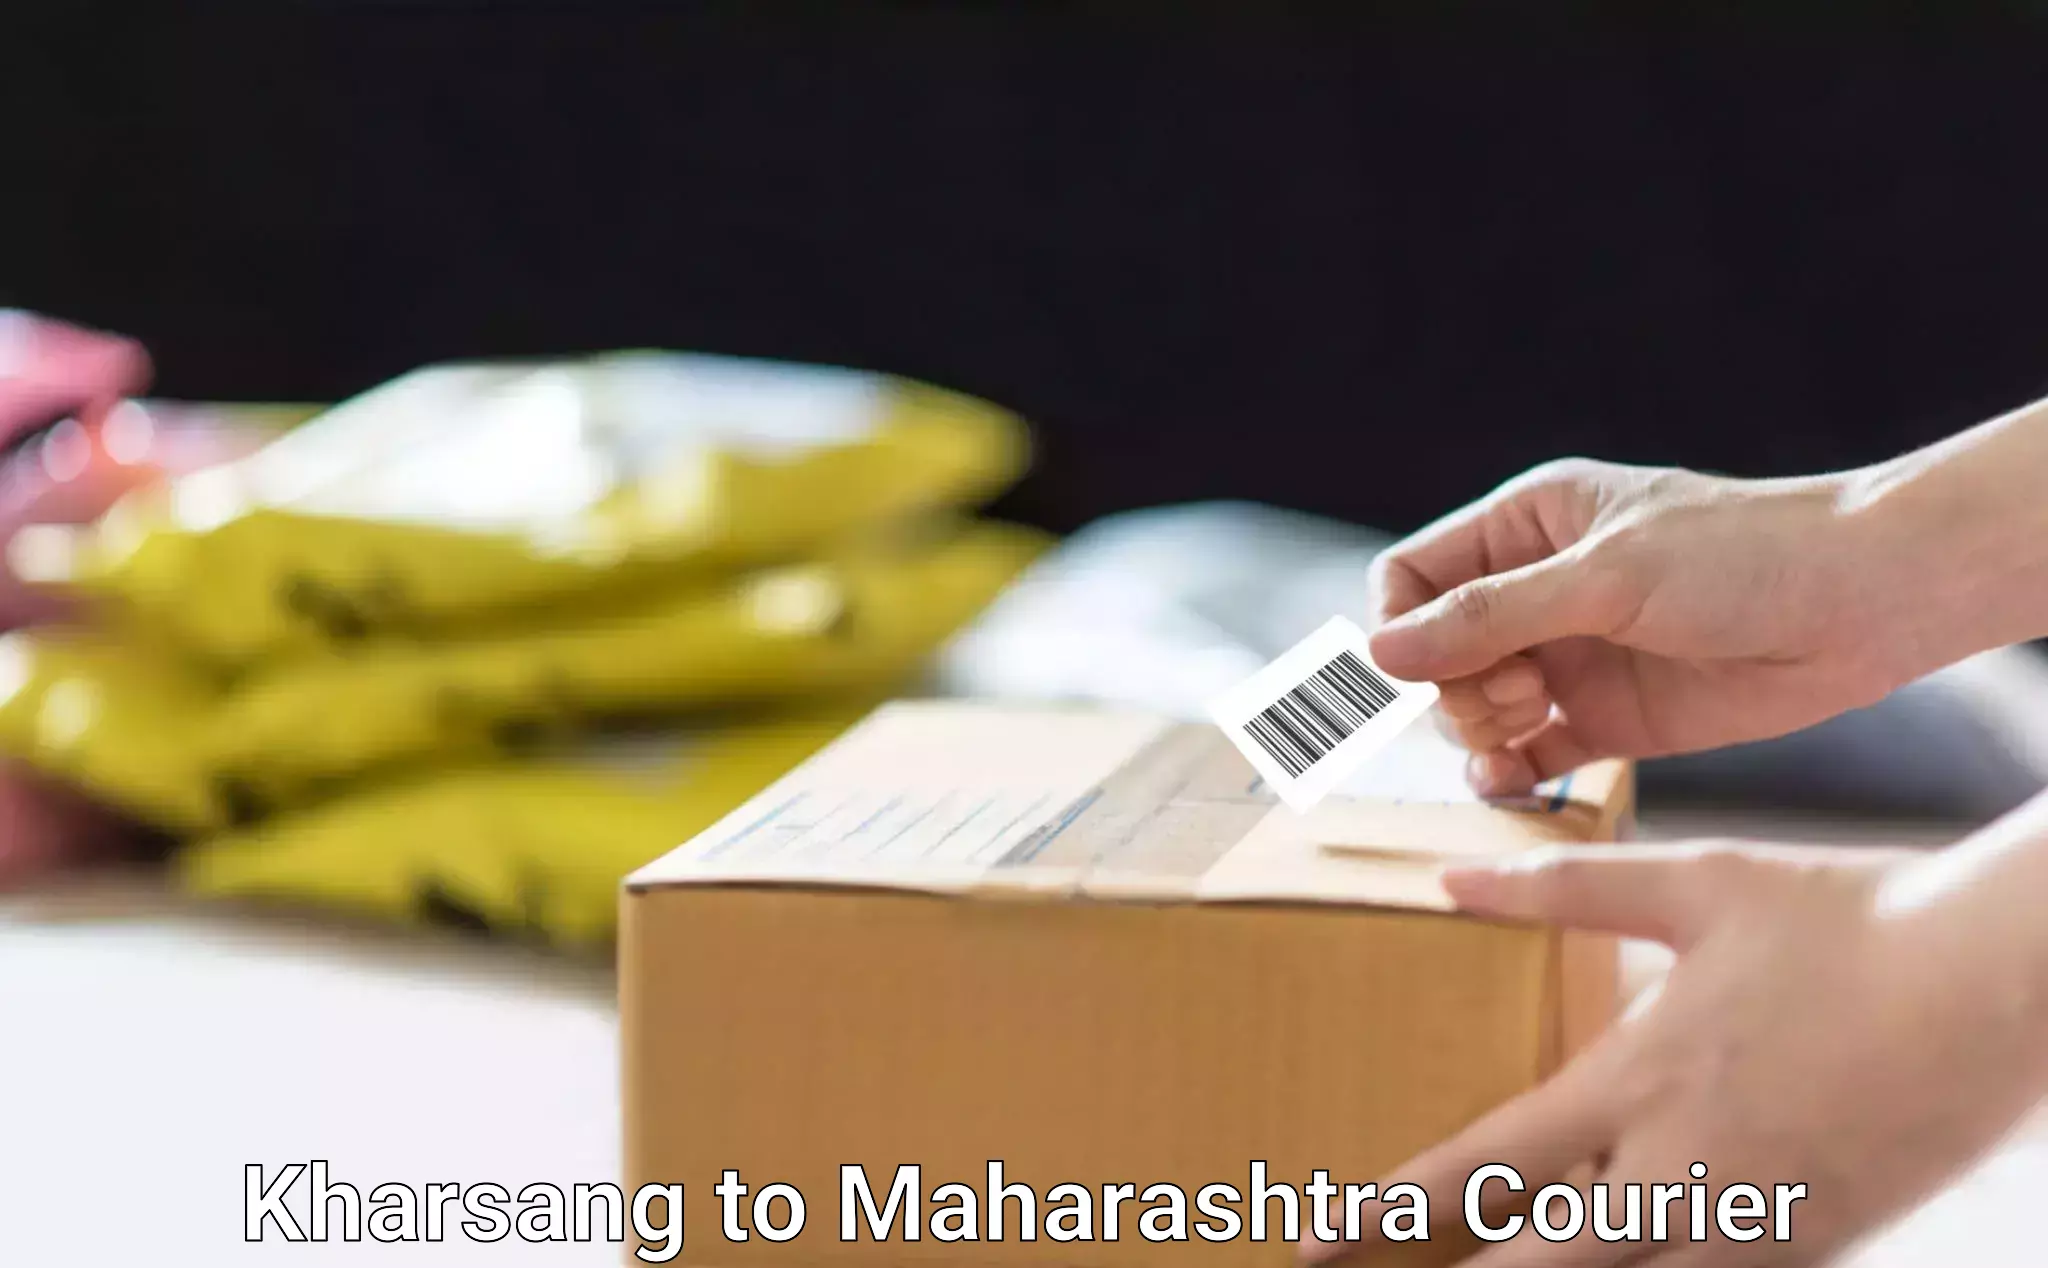 Personalized courier experiences Kharsang to Thane